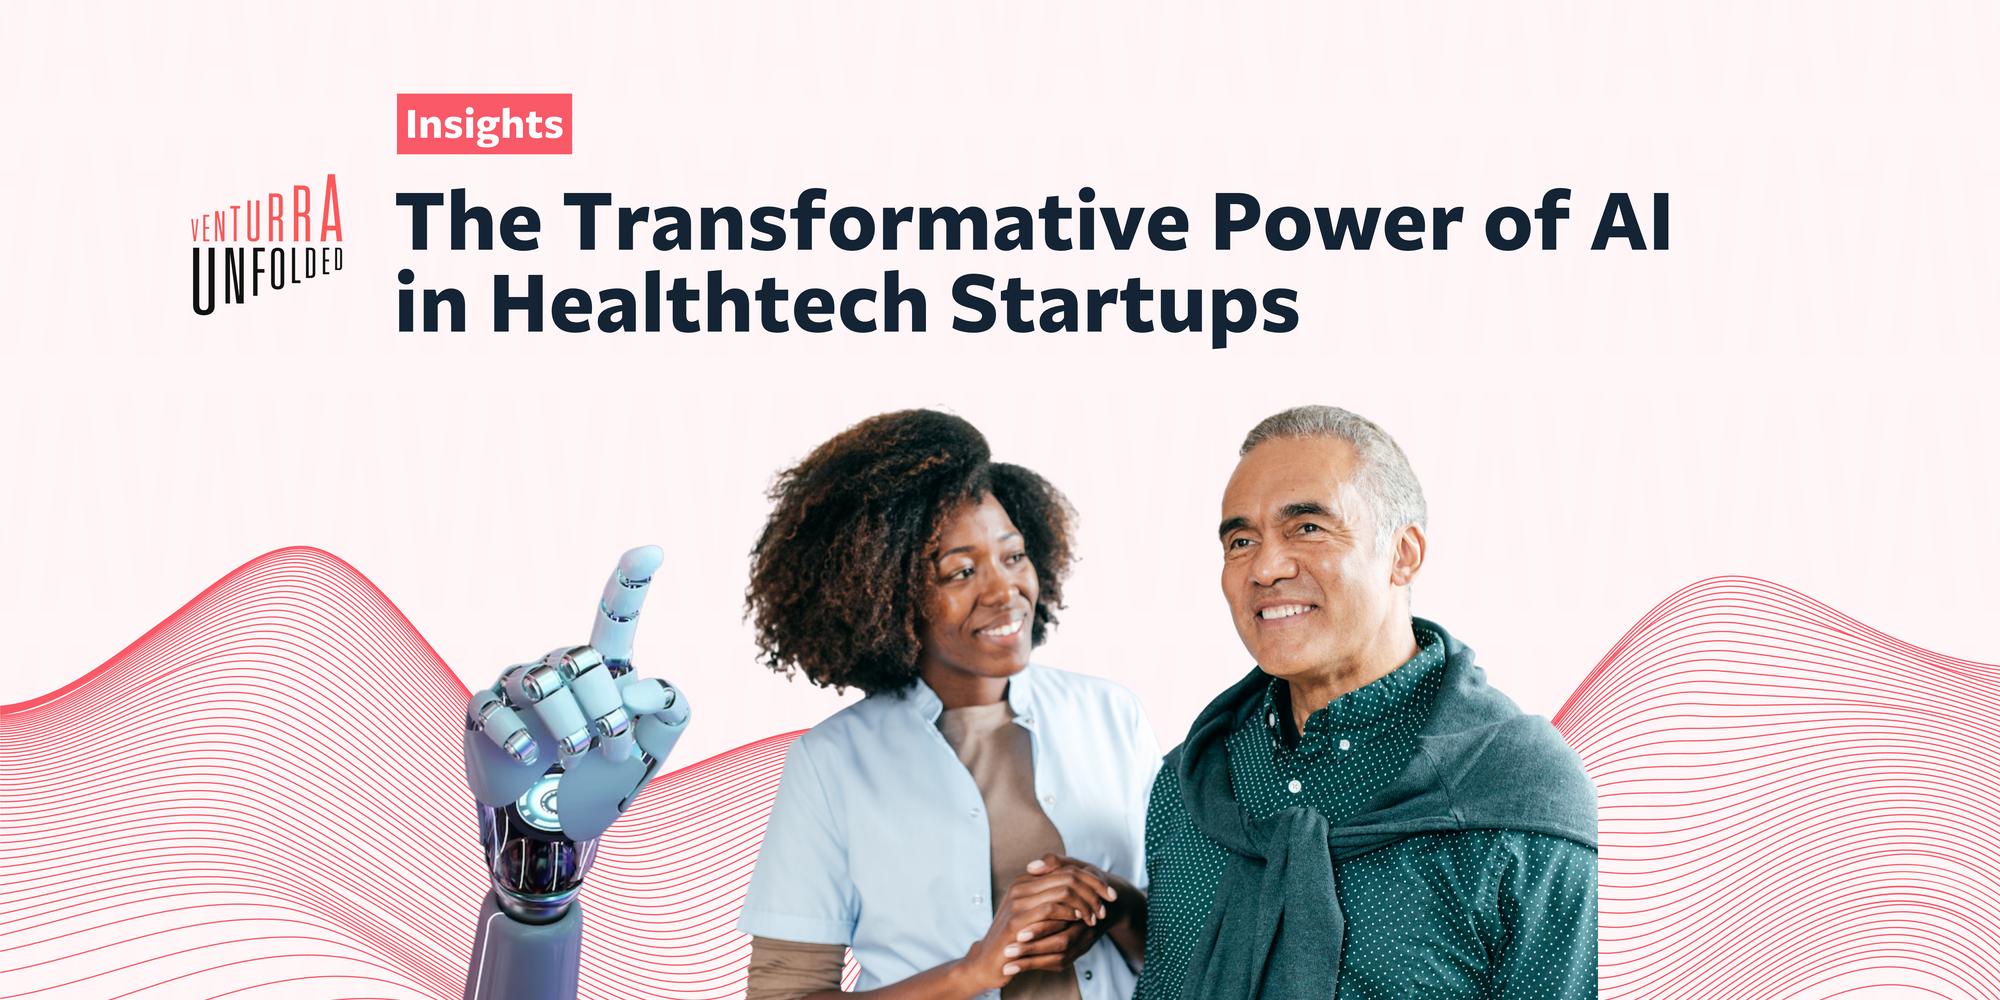 The Transformative Power of AI in Healthtech Startups